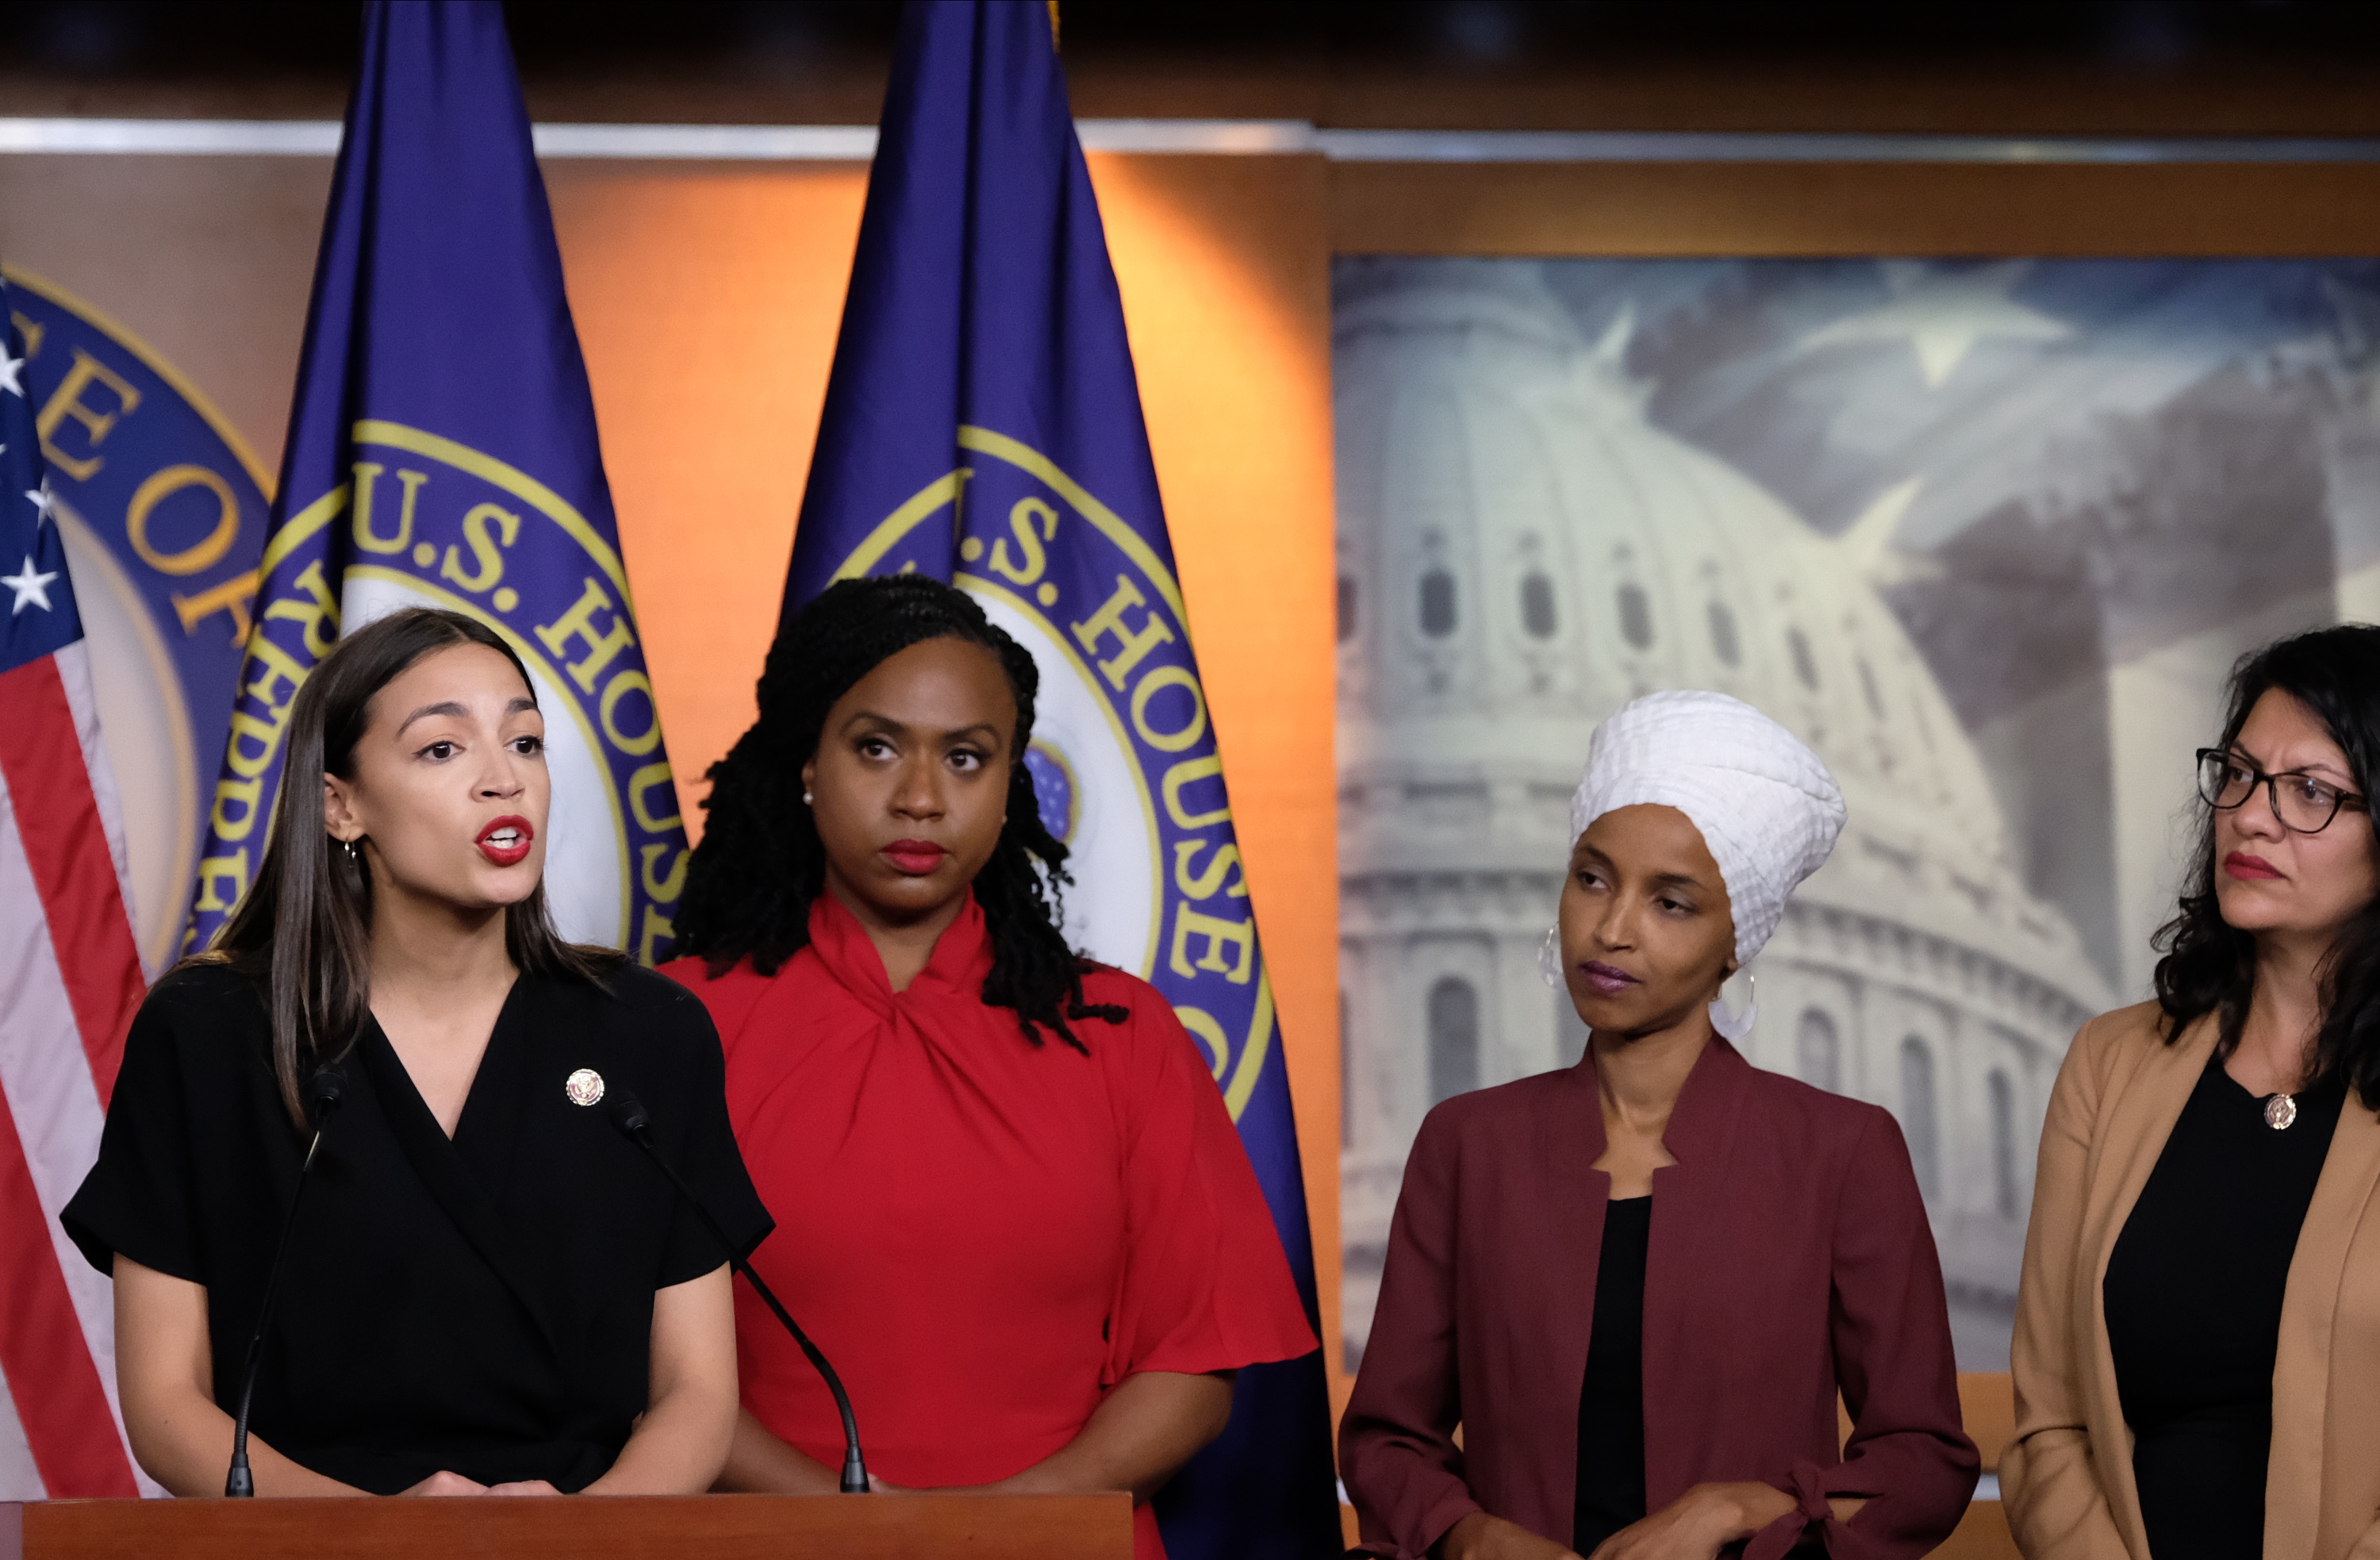 Congresswomen Ocasio-Cortez, Tlaib, Omar, And Pressley Hold News Conference After President Trump Attacks Them On TwitterWASHINGTON, DC - JULY 15: (L-R) U.S. Rep. Alexandria Ocasio-Cortez (D-NY) speaks as Reps. Ayanna Pressley (D-MA), Ilhan Omar (D-MN) and Rashida Tlaib (D-MI) listen during a news conference at the U.S. Capitol on July 15, 2019 in Washington, DC. (Photo by Alex Wroblewski/Getty Images)